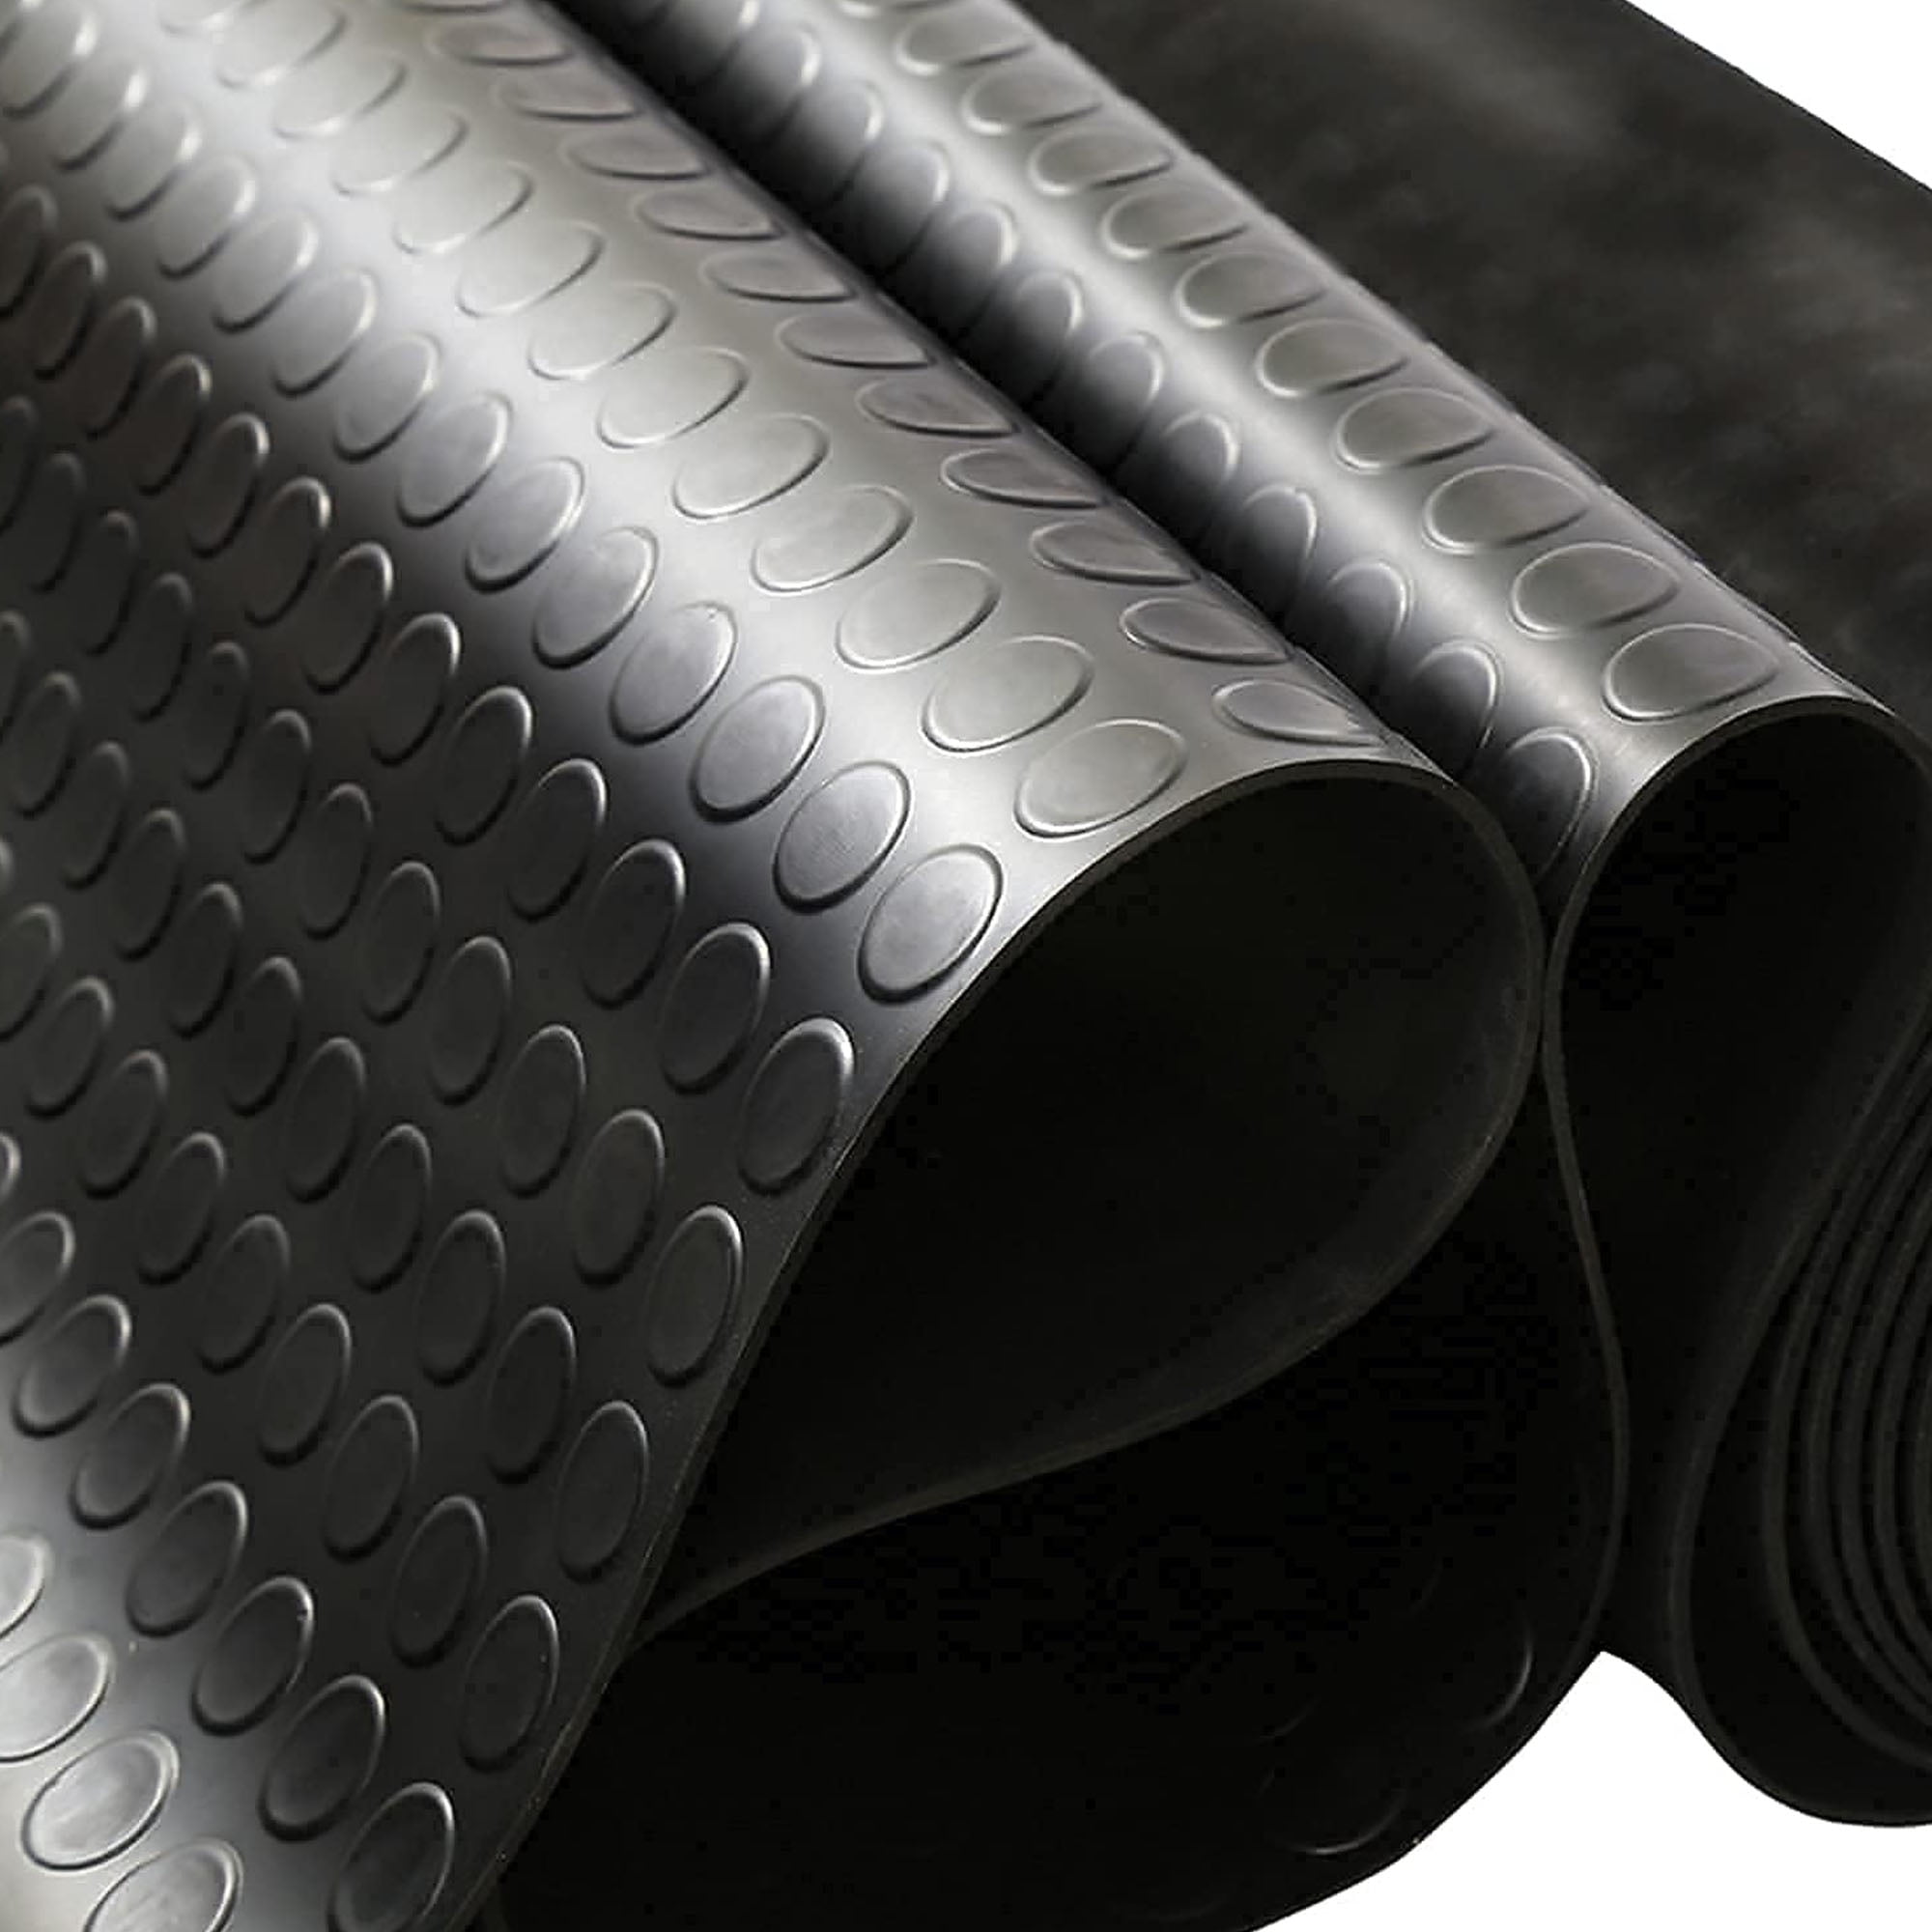 3/4 Thick Rubber Roll Matting is 19mm Rubber Flooring by American Floor  Mats